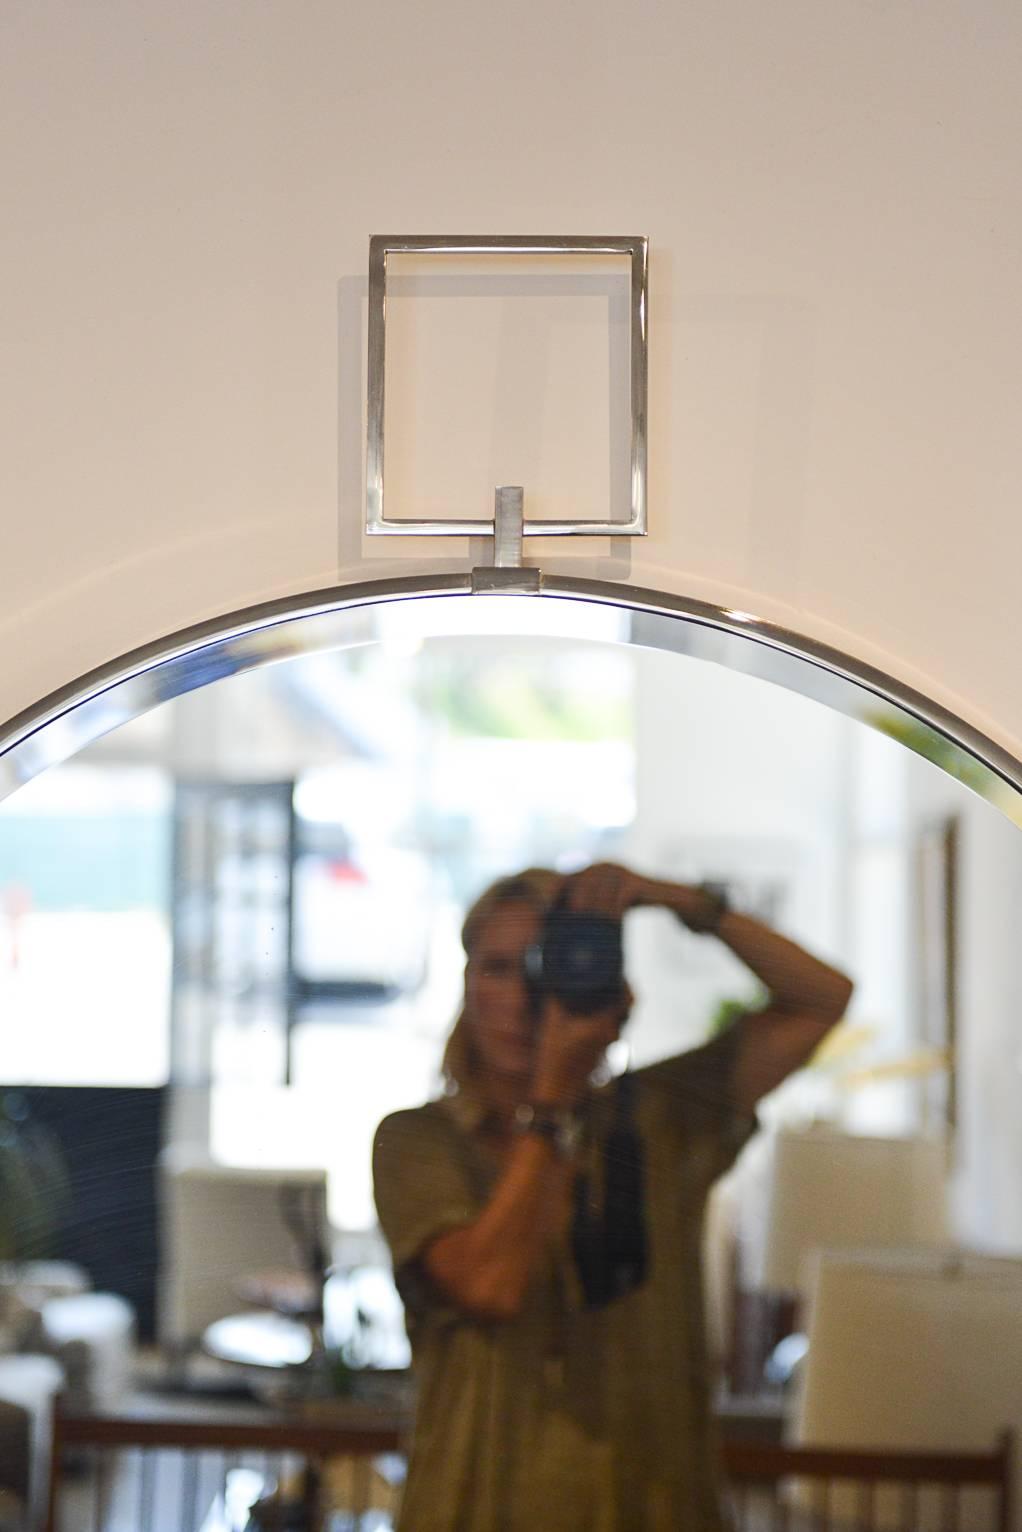 Custom beveled glass and chrome mirror in excellent condition.

Measures: 36